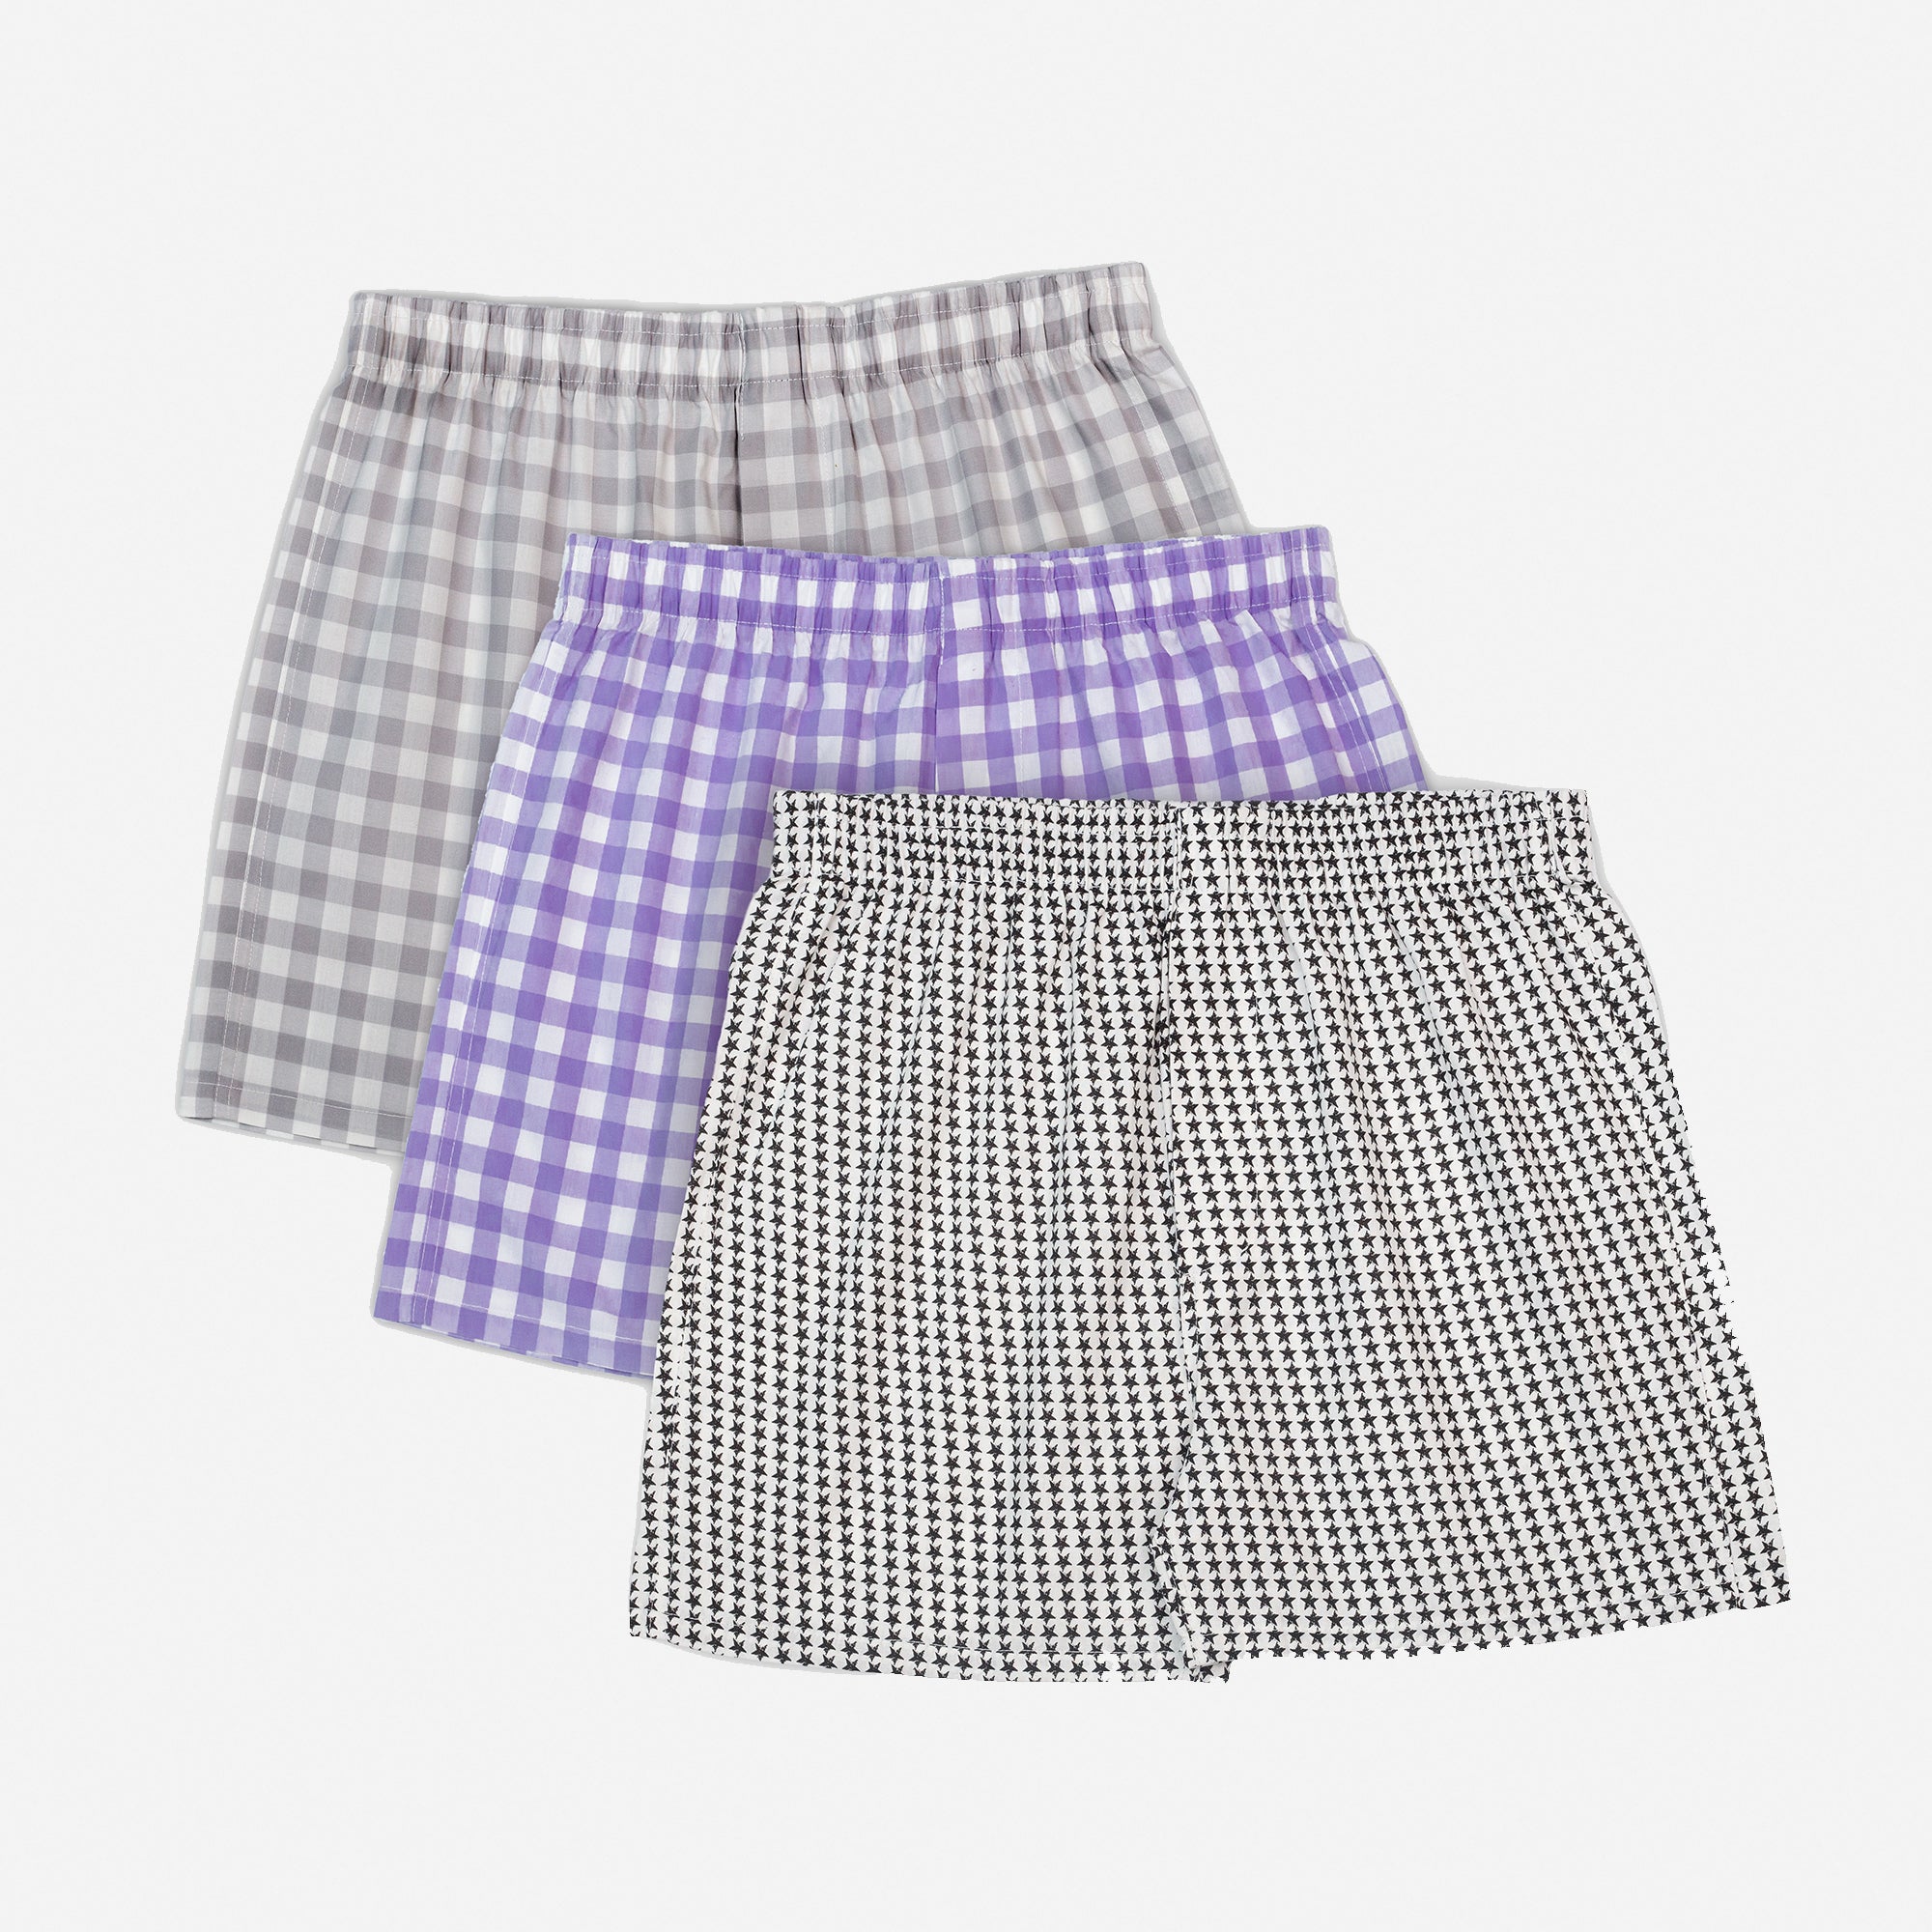 Men's 100% Cotton Boxer Shorts Waistband Check Print Boxers - Pack of 3